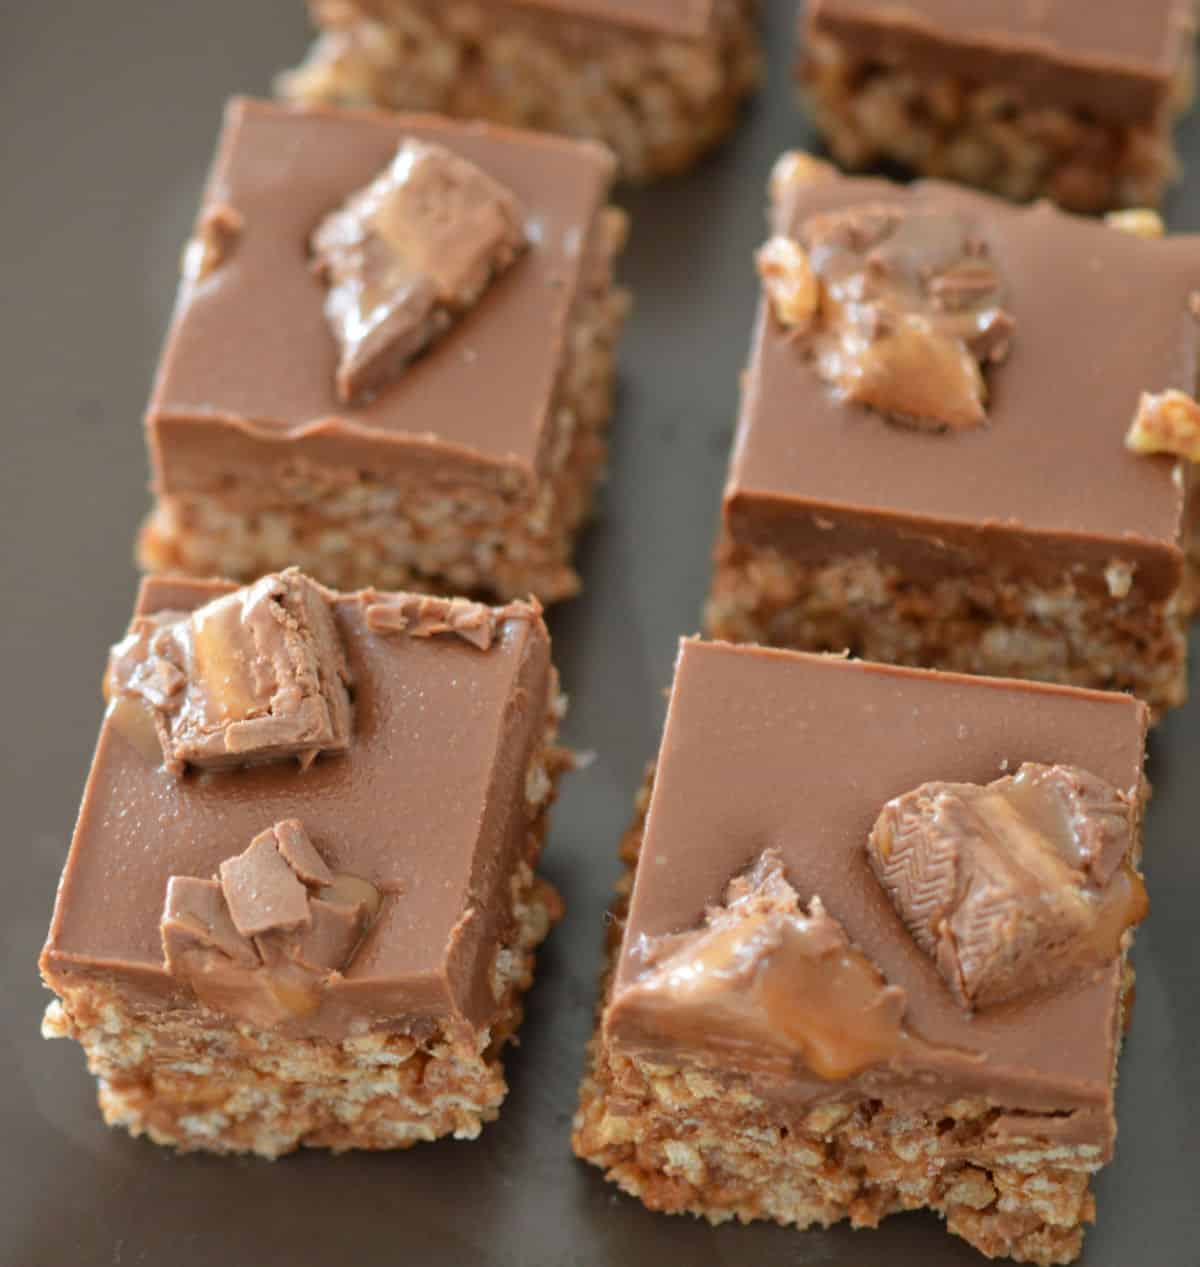 overhead view of mars bar slice pieces on plate